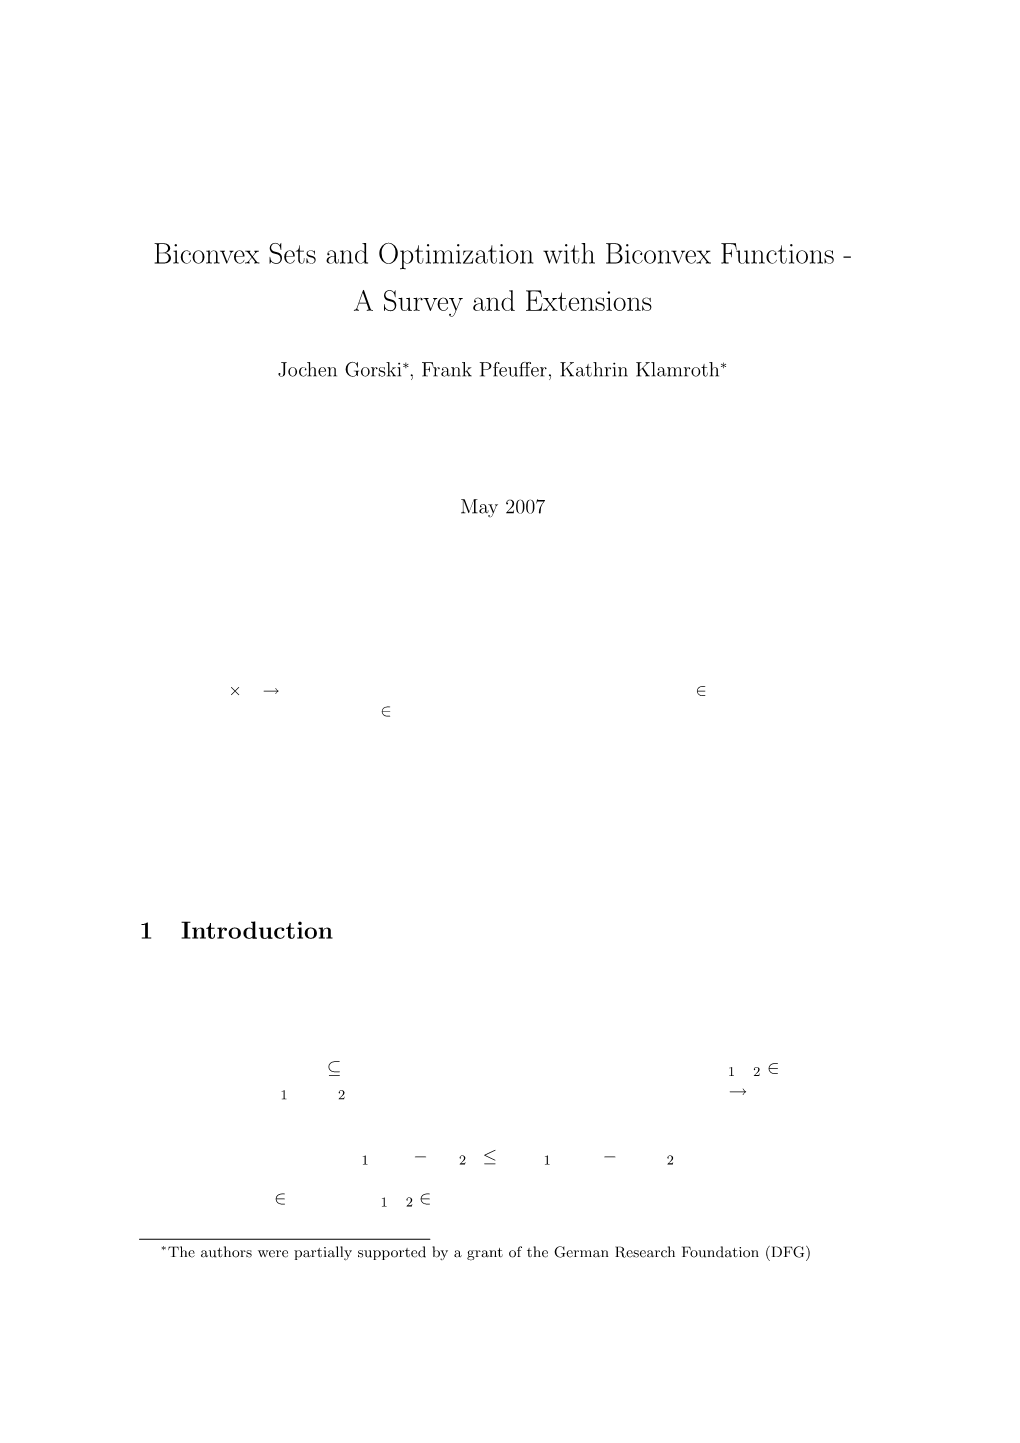 Biconvex Sets and Optimization with Biconvex Functions - a Survey and Extensions